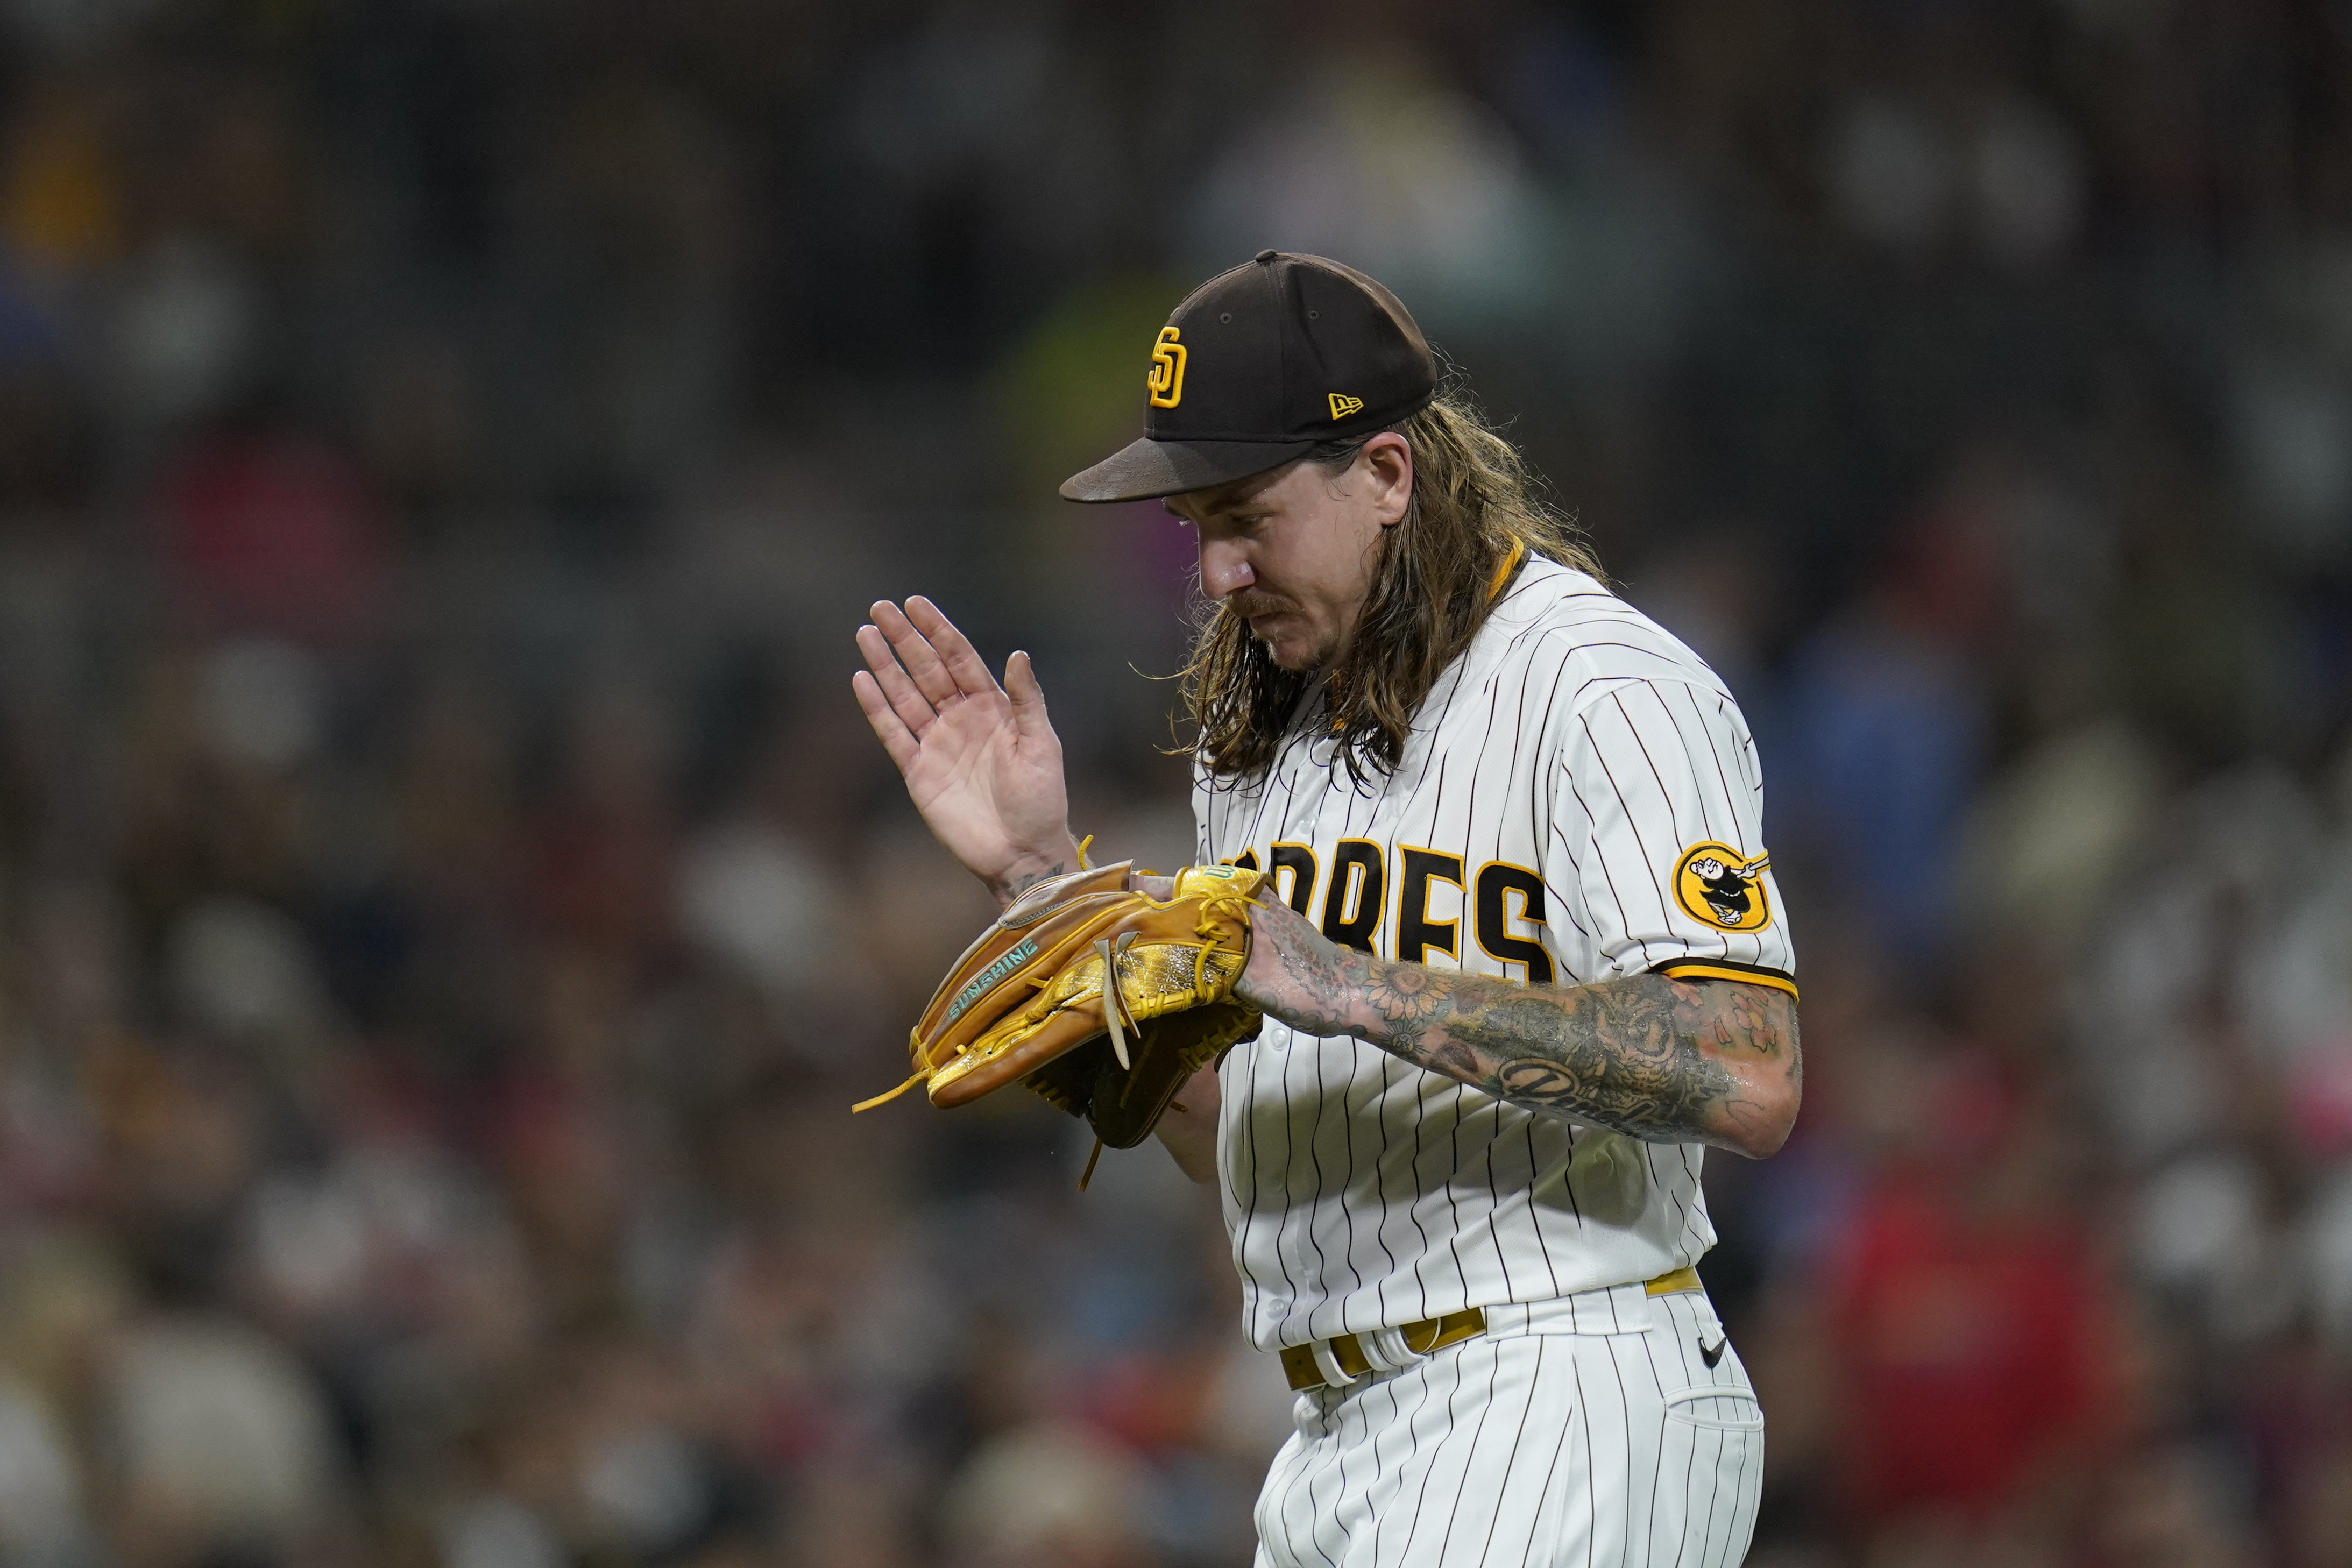 Padres Editorial: Six Games, Five Different Jerseys- Where's the Tradition?